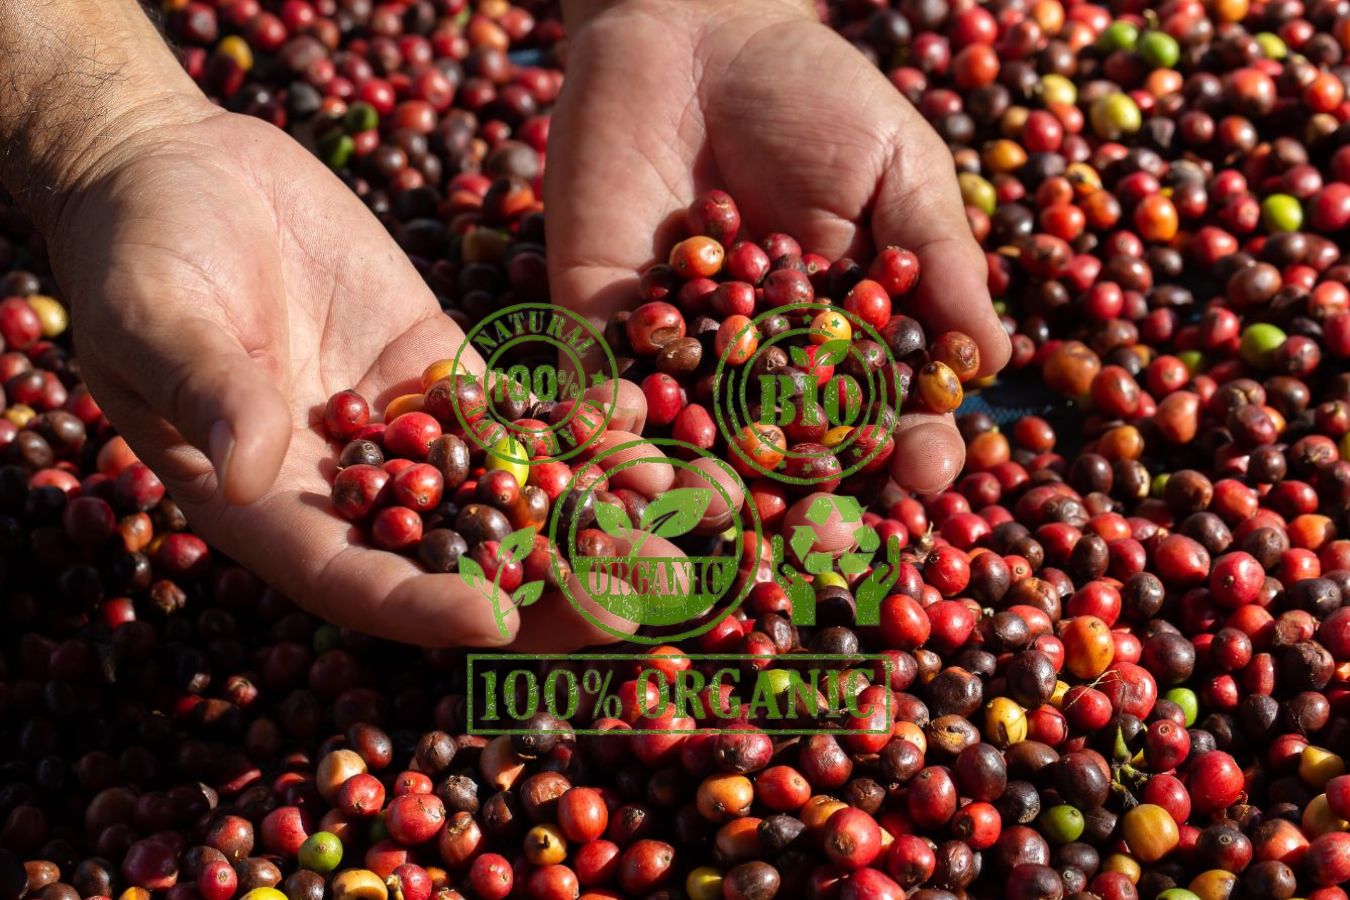 Vietnam Organic Green Coffee Beans Supplier: Why Not Collaborate With Helena?